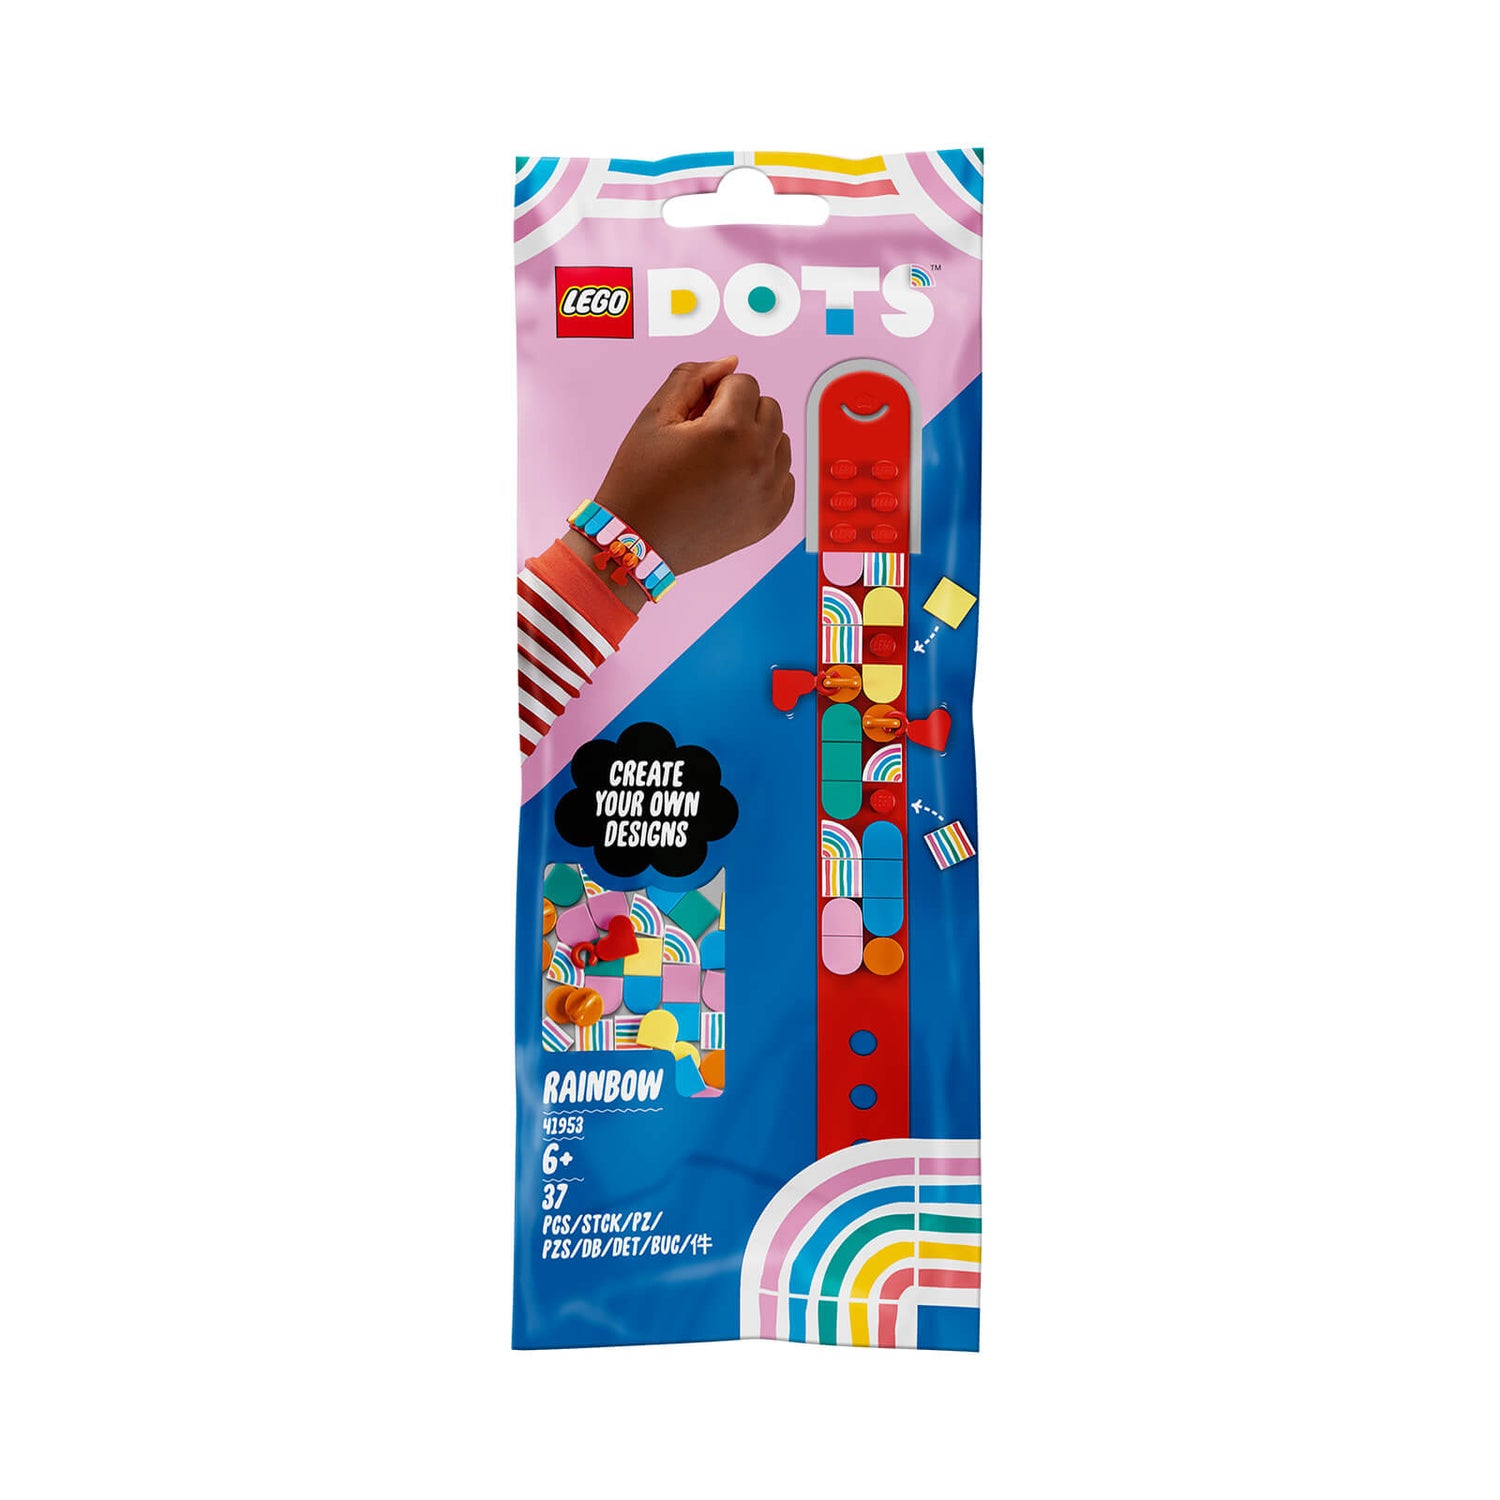 LEGO DOTS: Rainbow Bracelet with Charms Toy Crafts Set (41953)